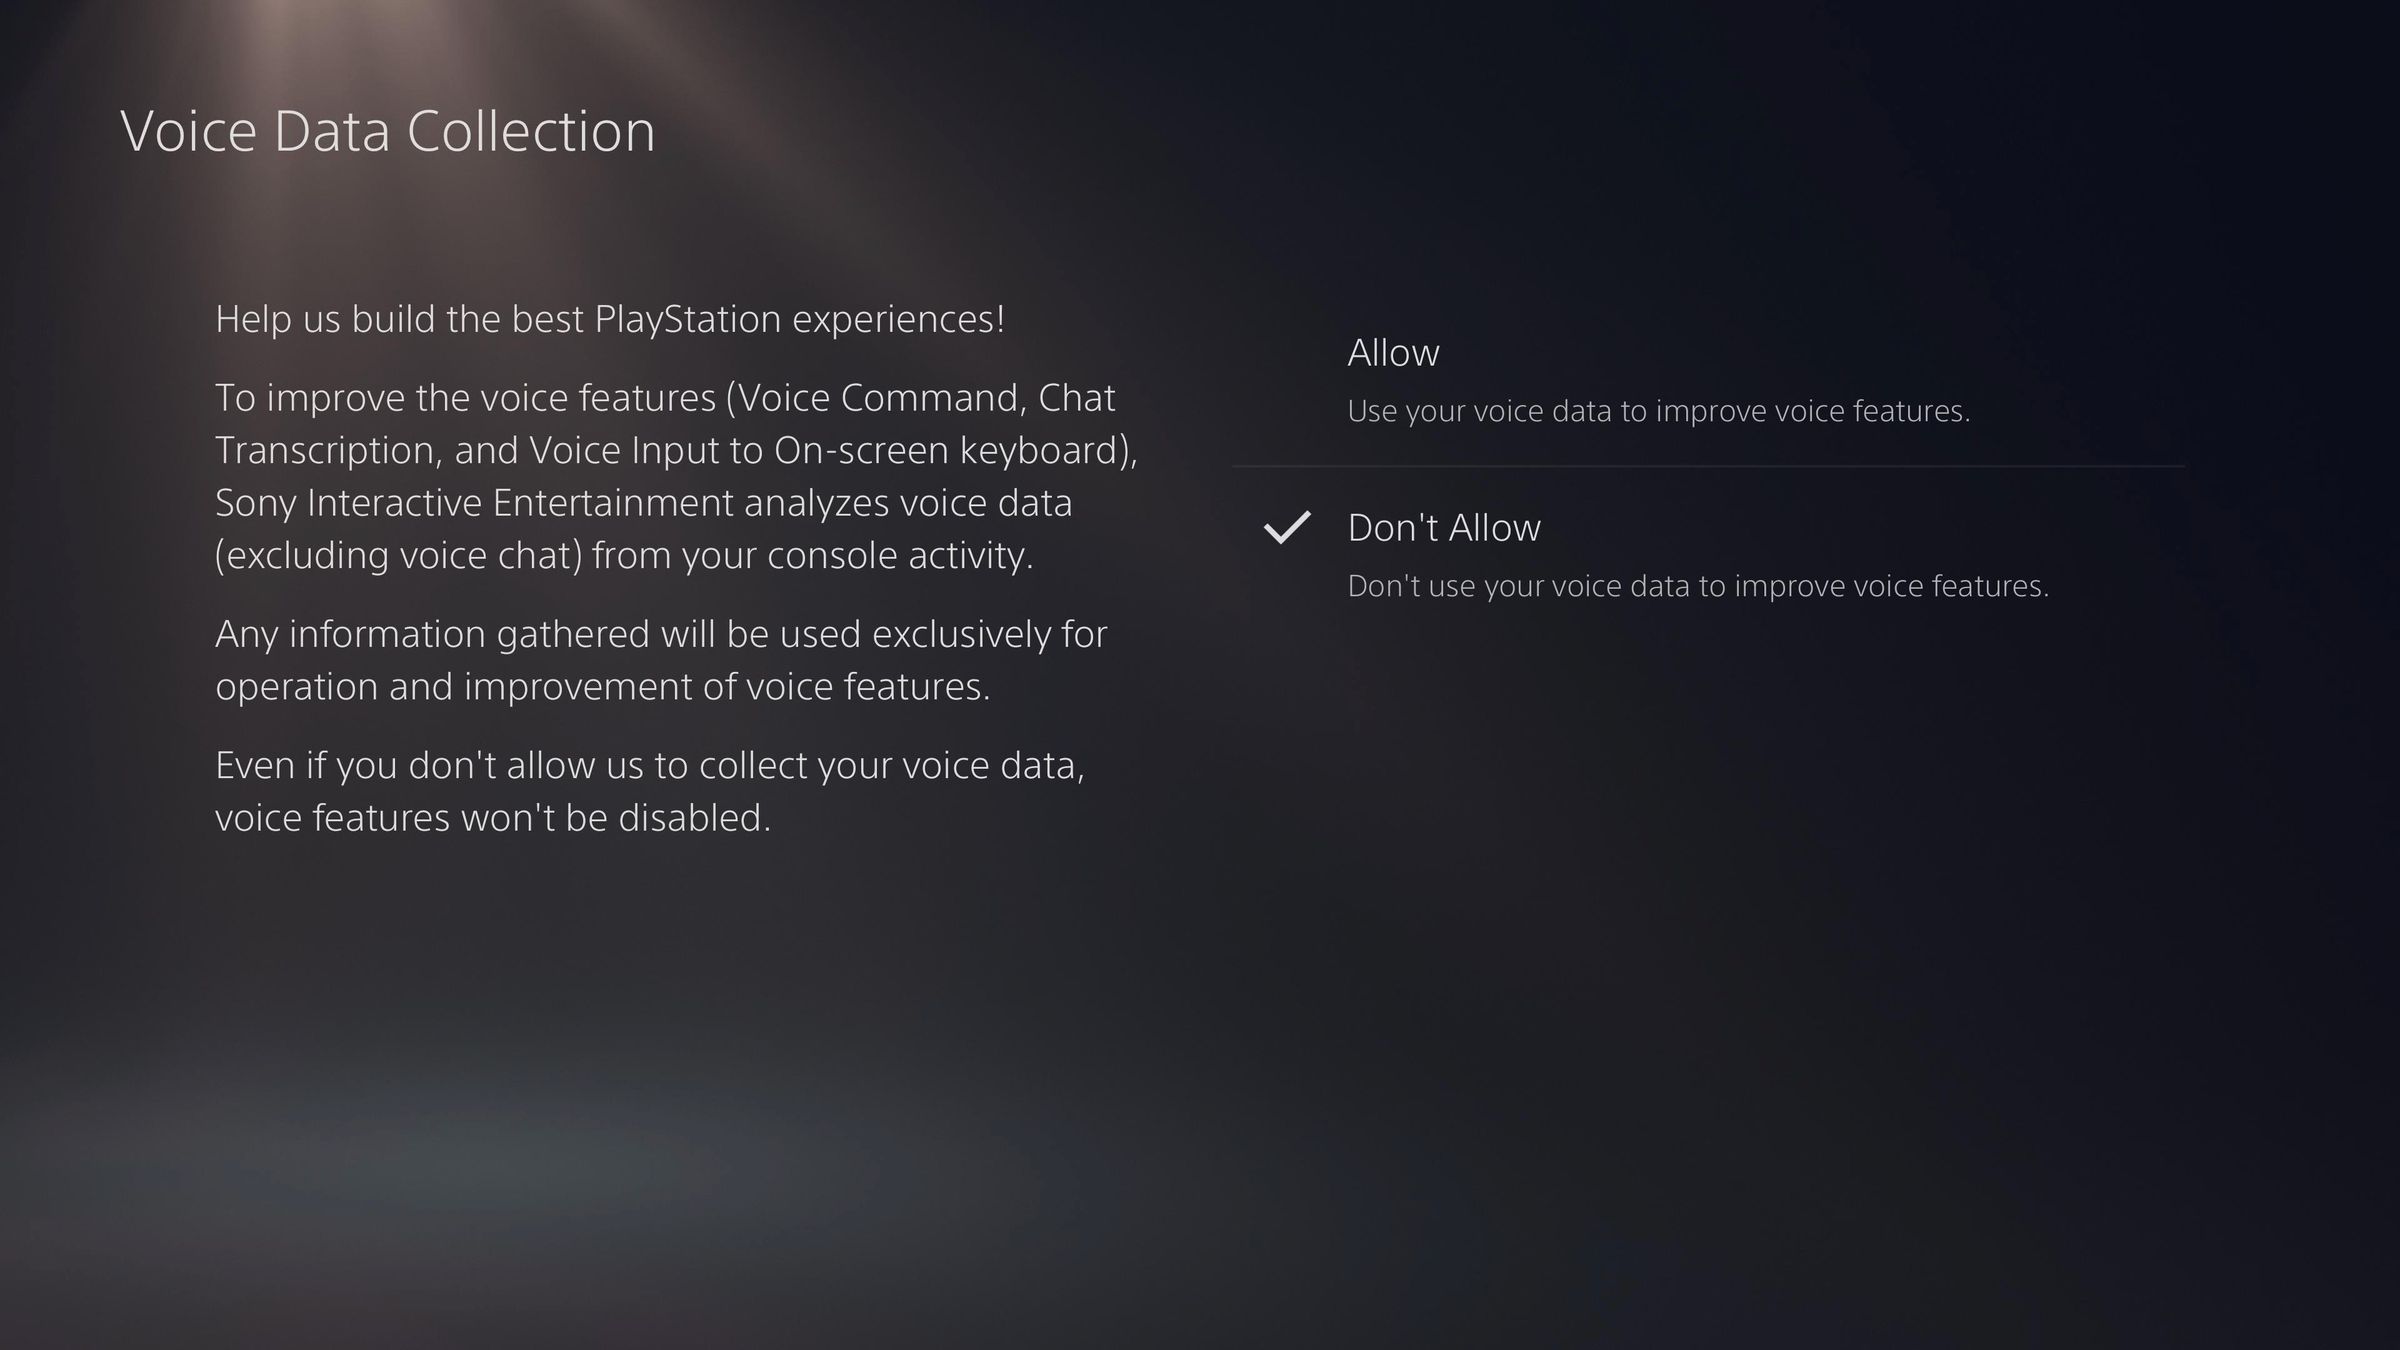 The Voice Data Collection options can be found in the PS5’s Privacy settings menu.